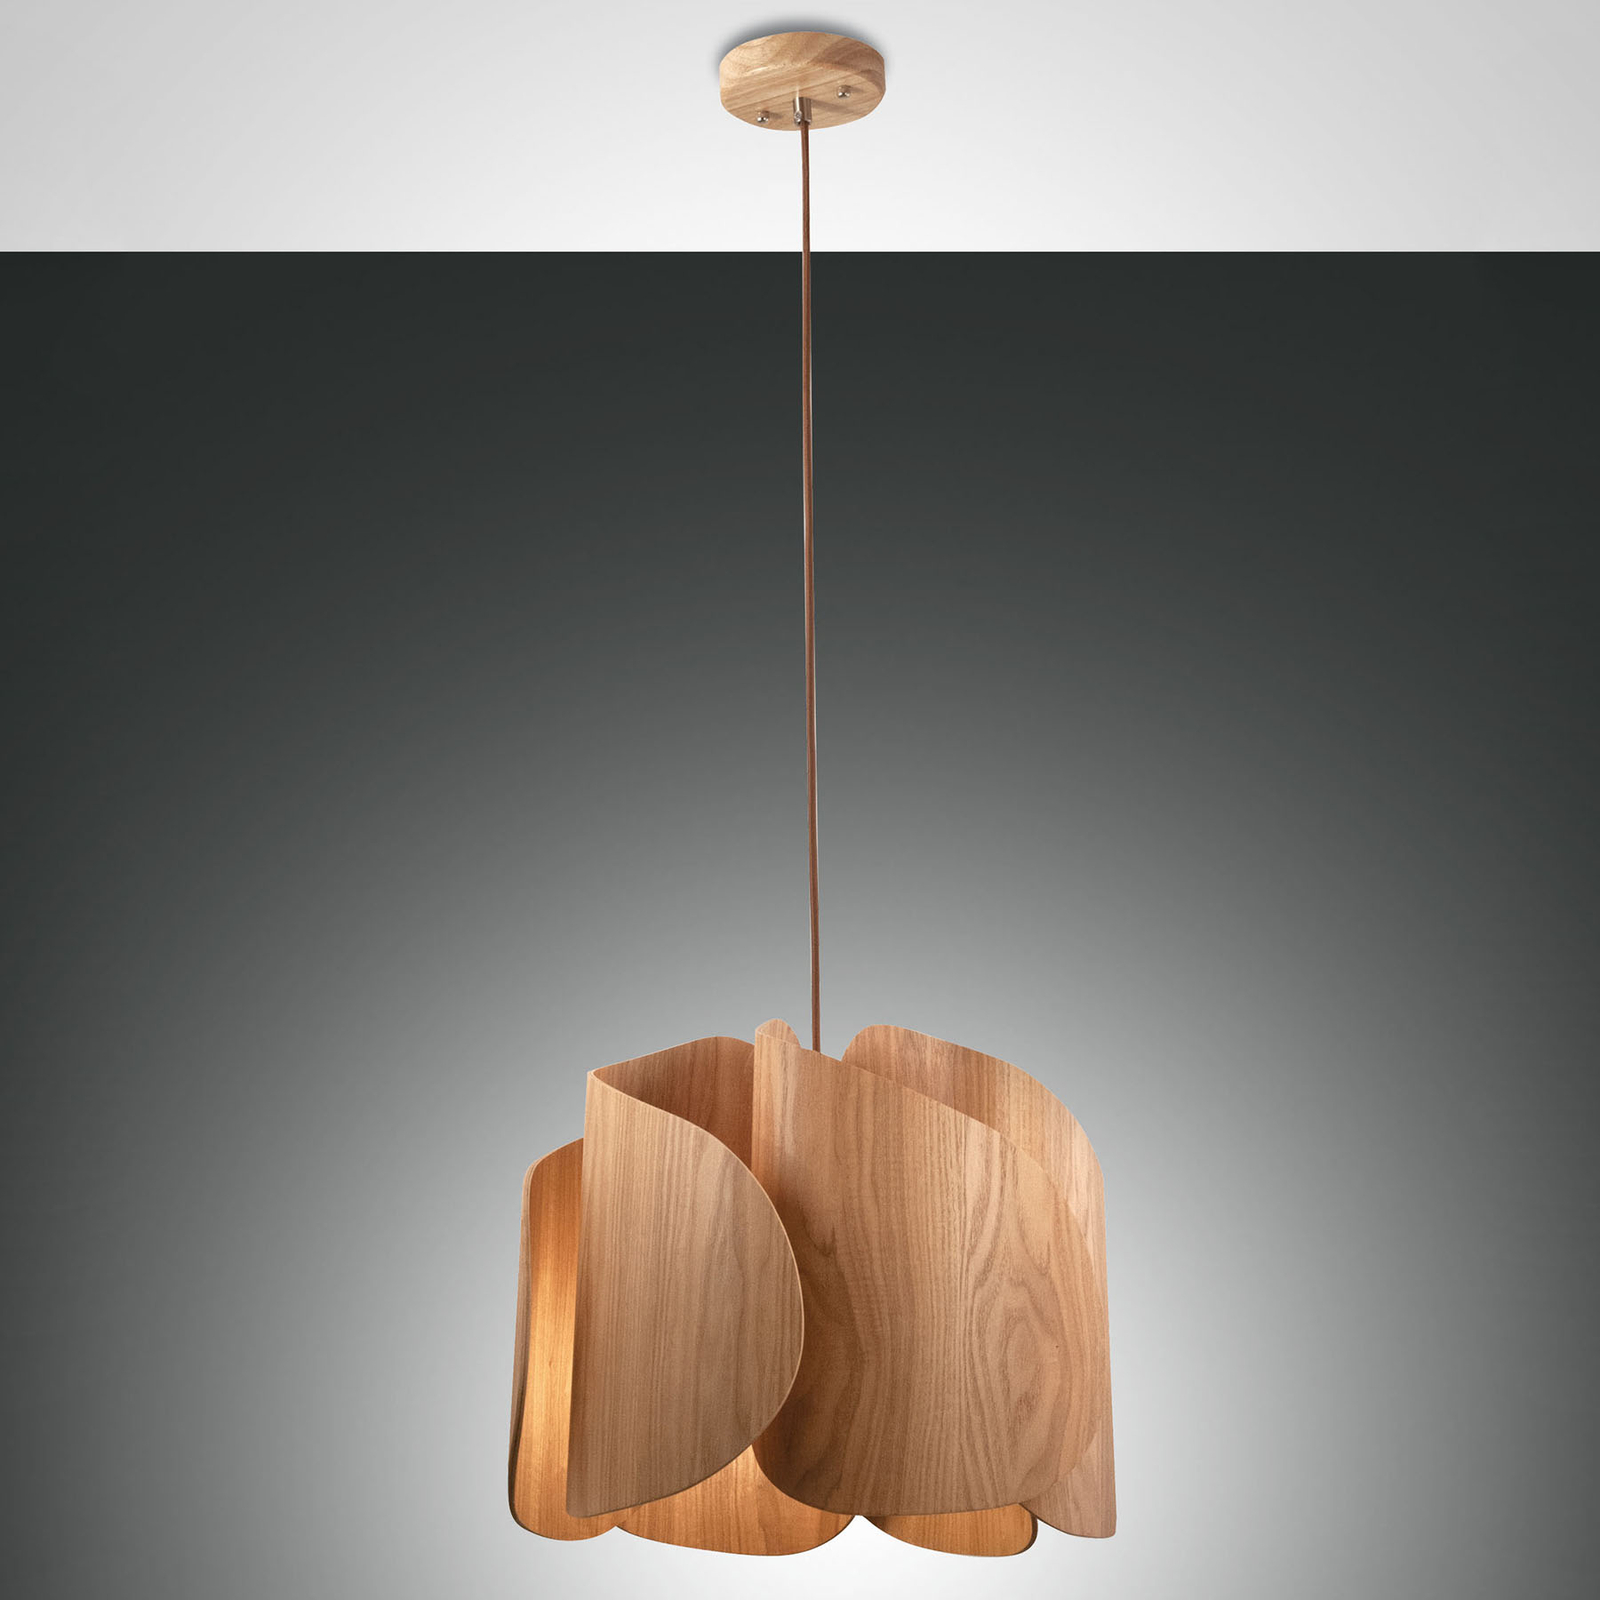 Hanging light Pevero in ash wood, curved shape